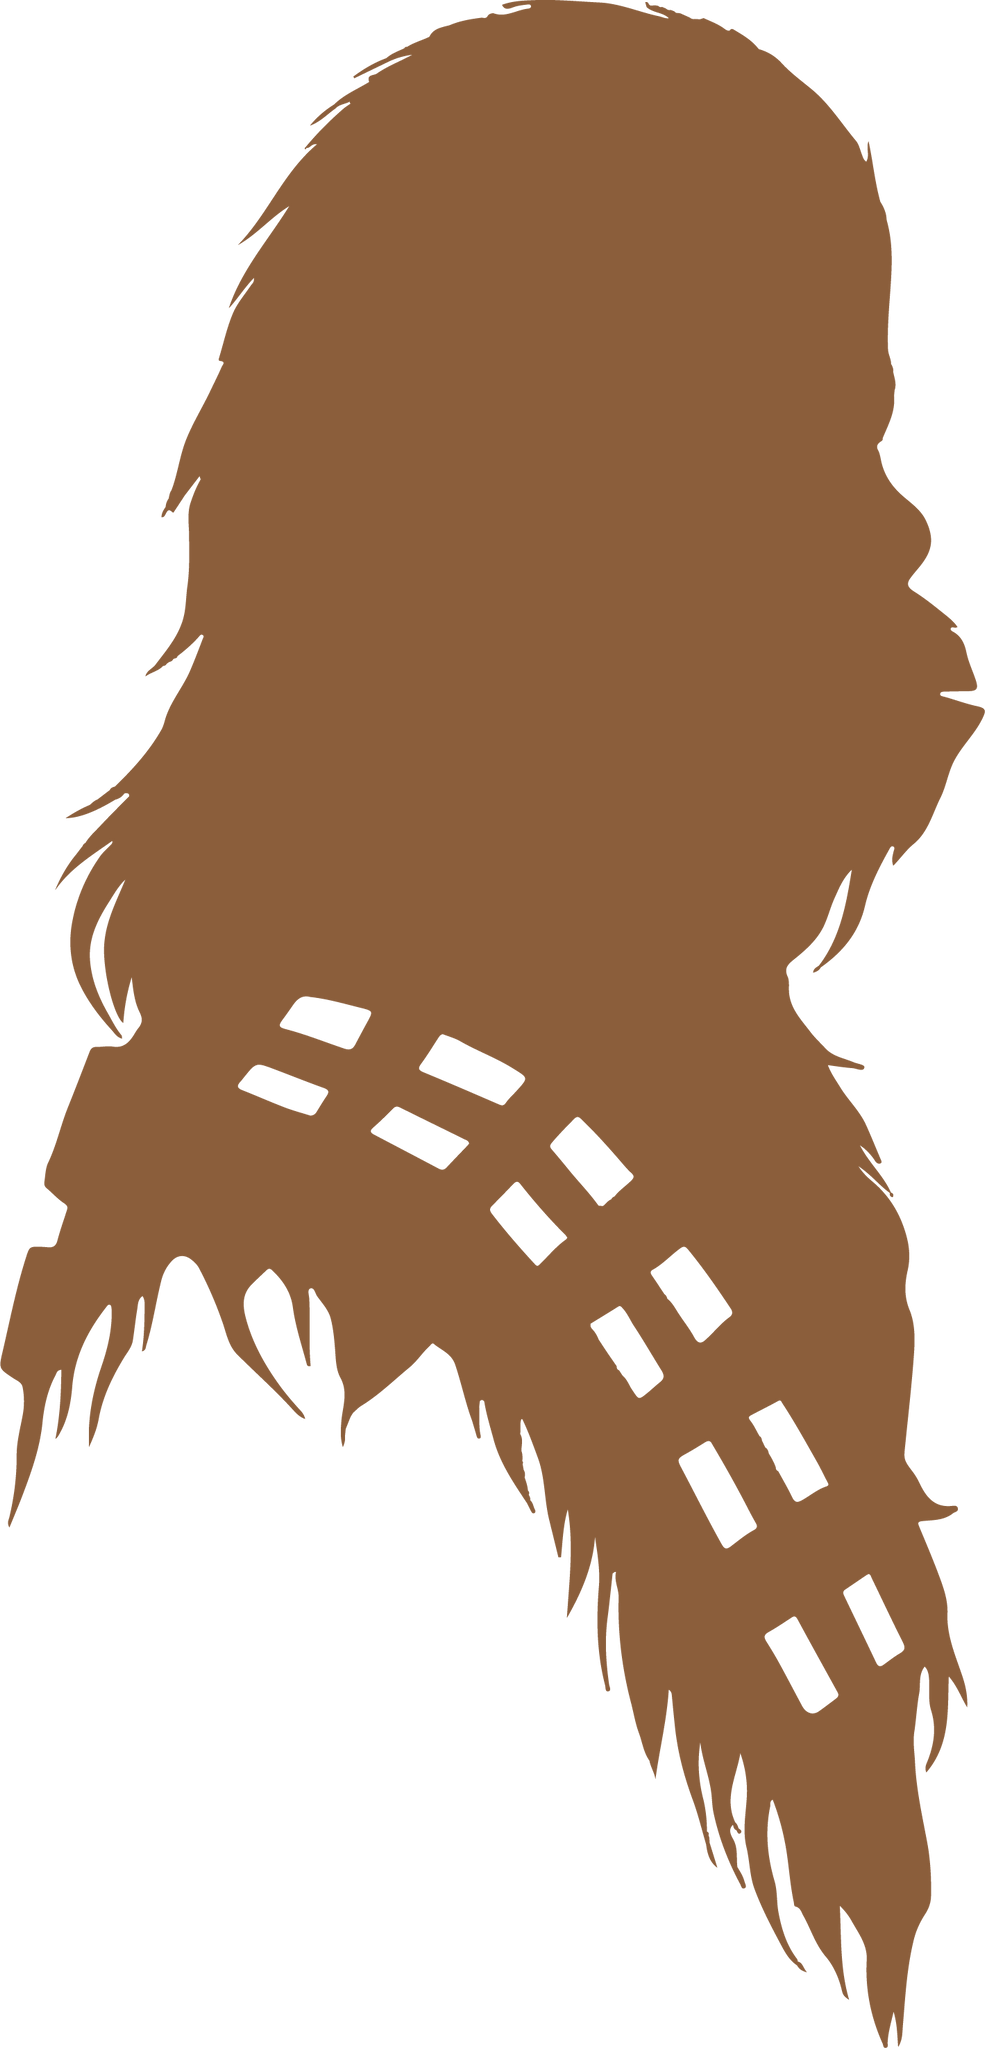 Download Chewbacca Silhouette | Star Wars SVG DXF EPS PNG Cut File | Cricut and - Paper & Pi